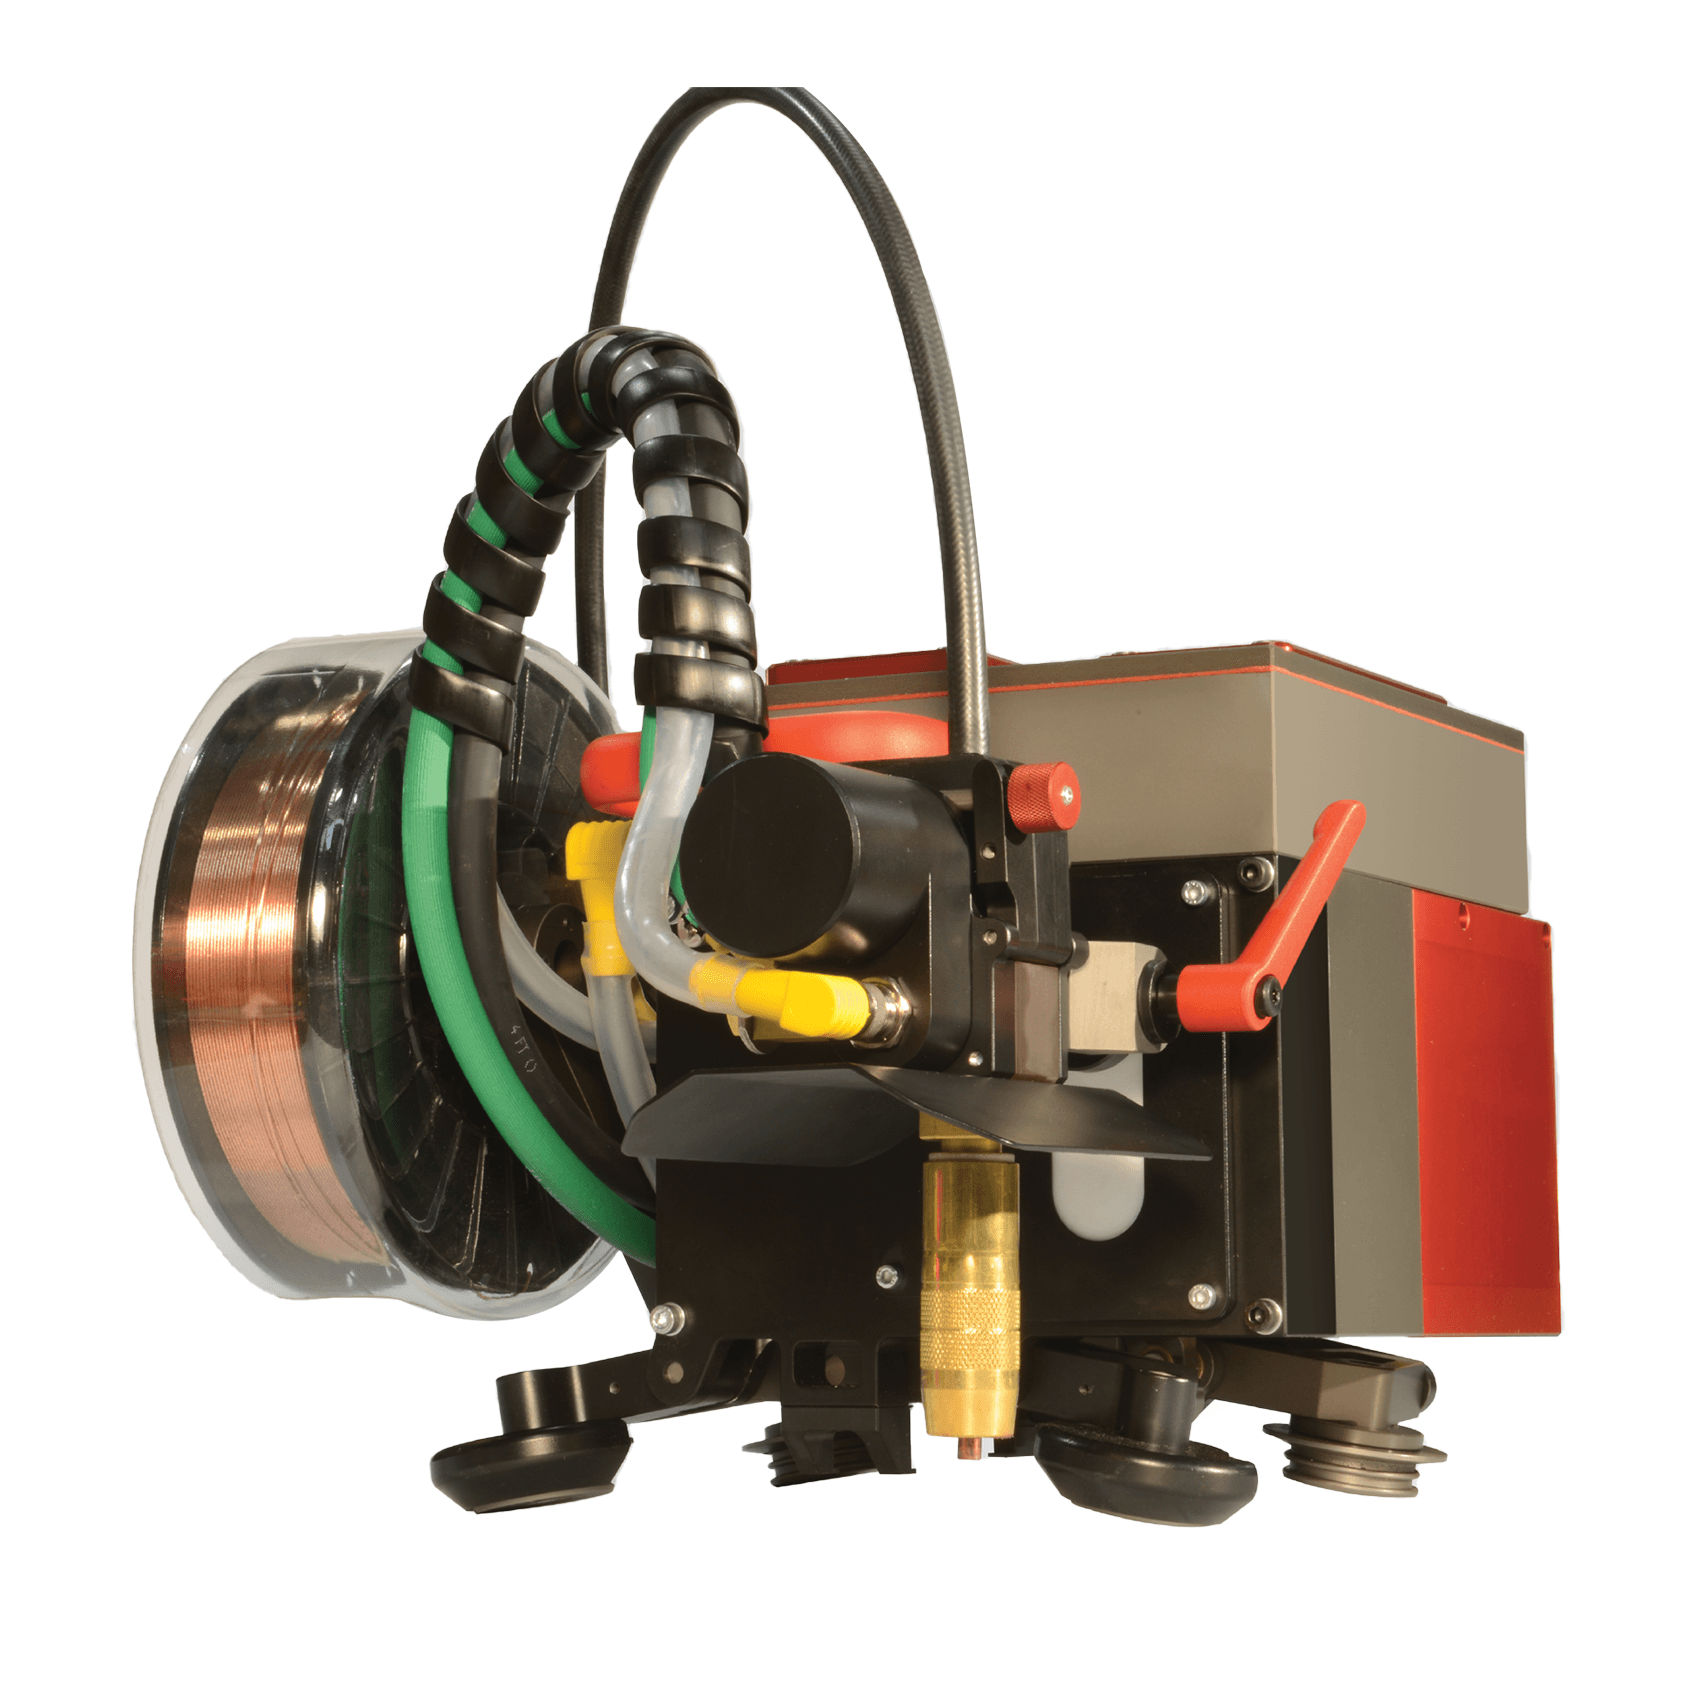 Product M-500 Single Torch External Welding System - CRC Evans image